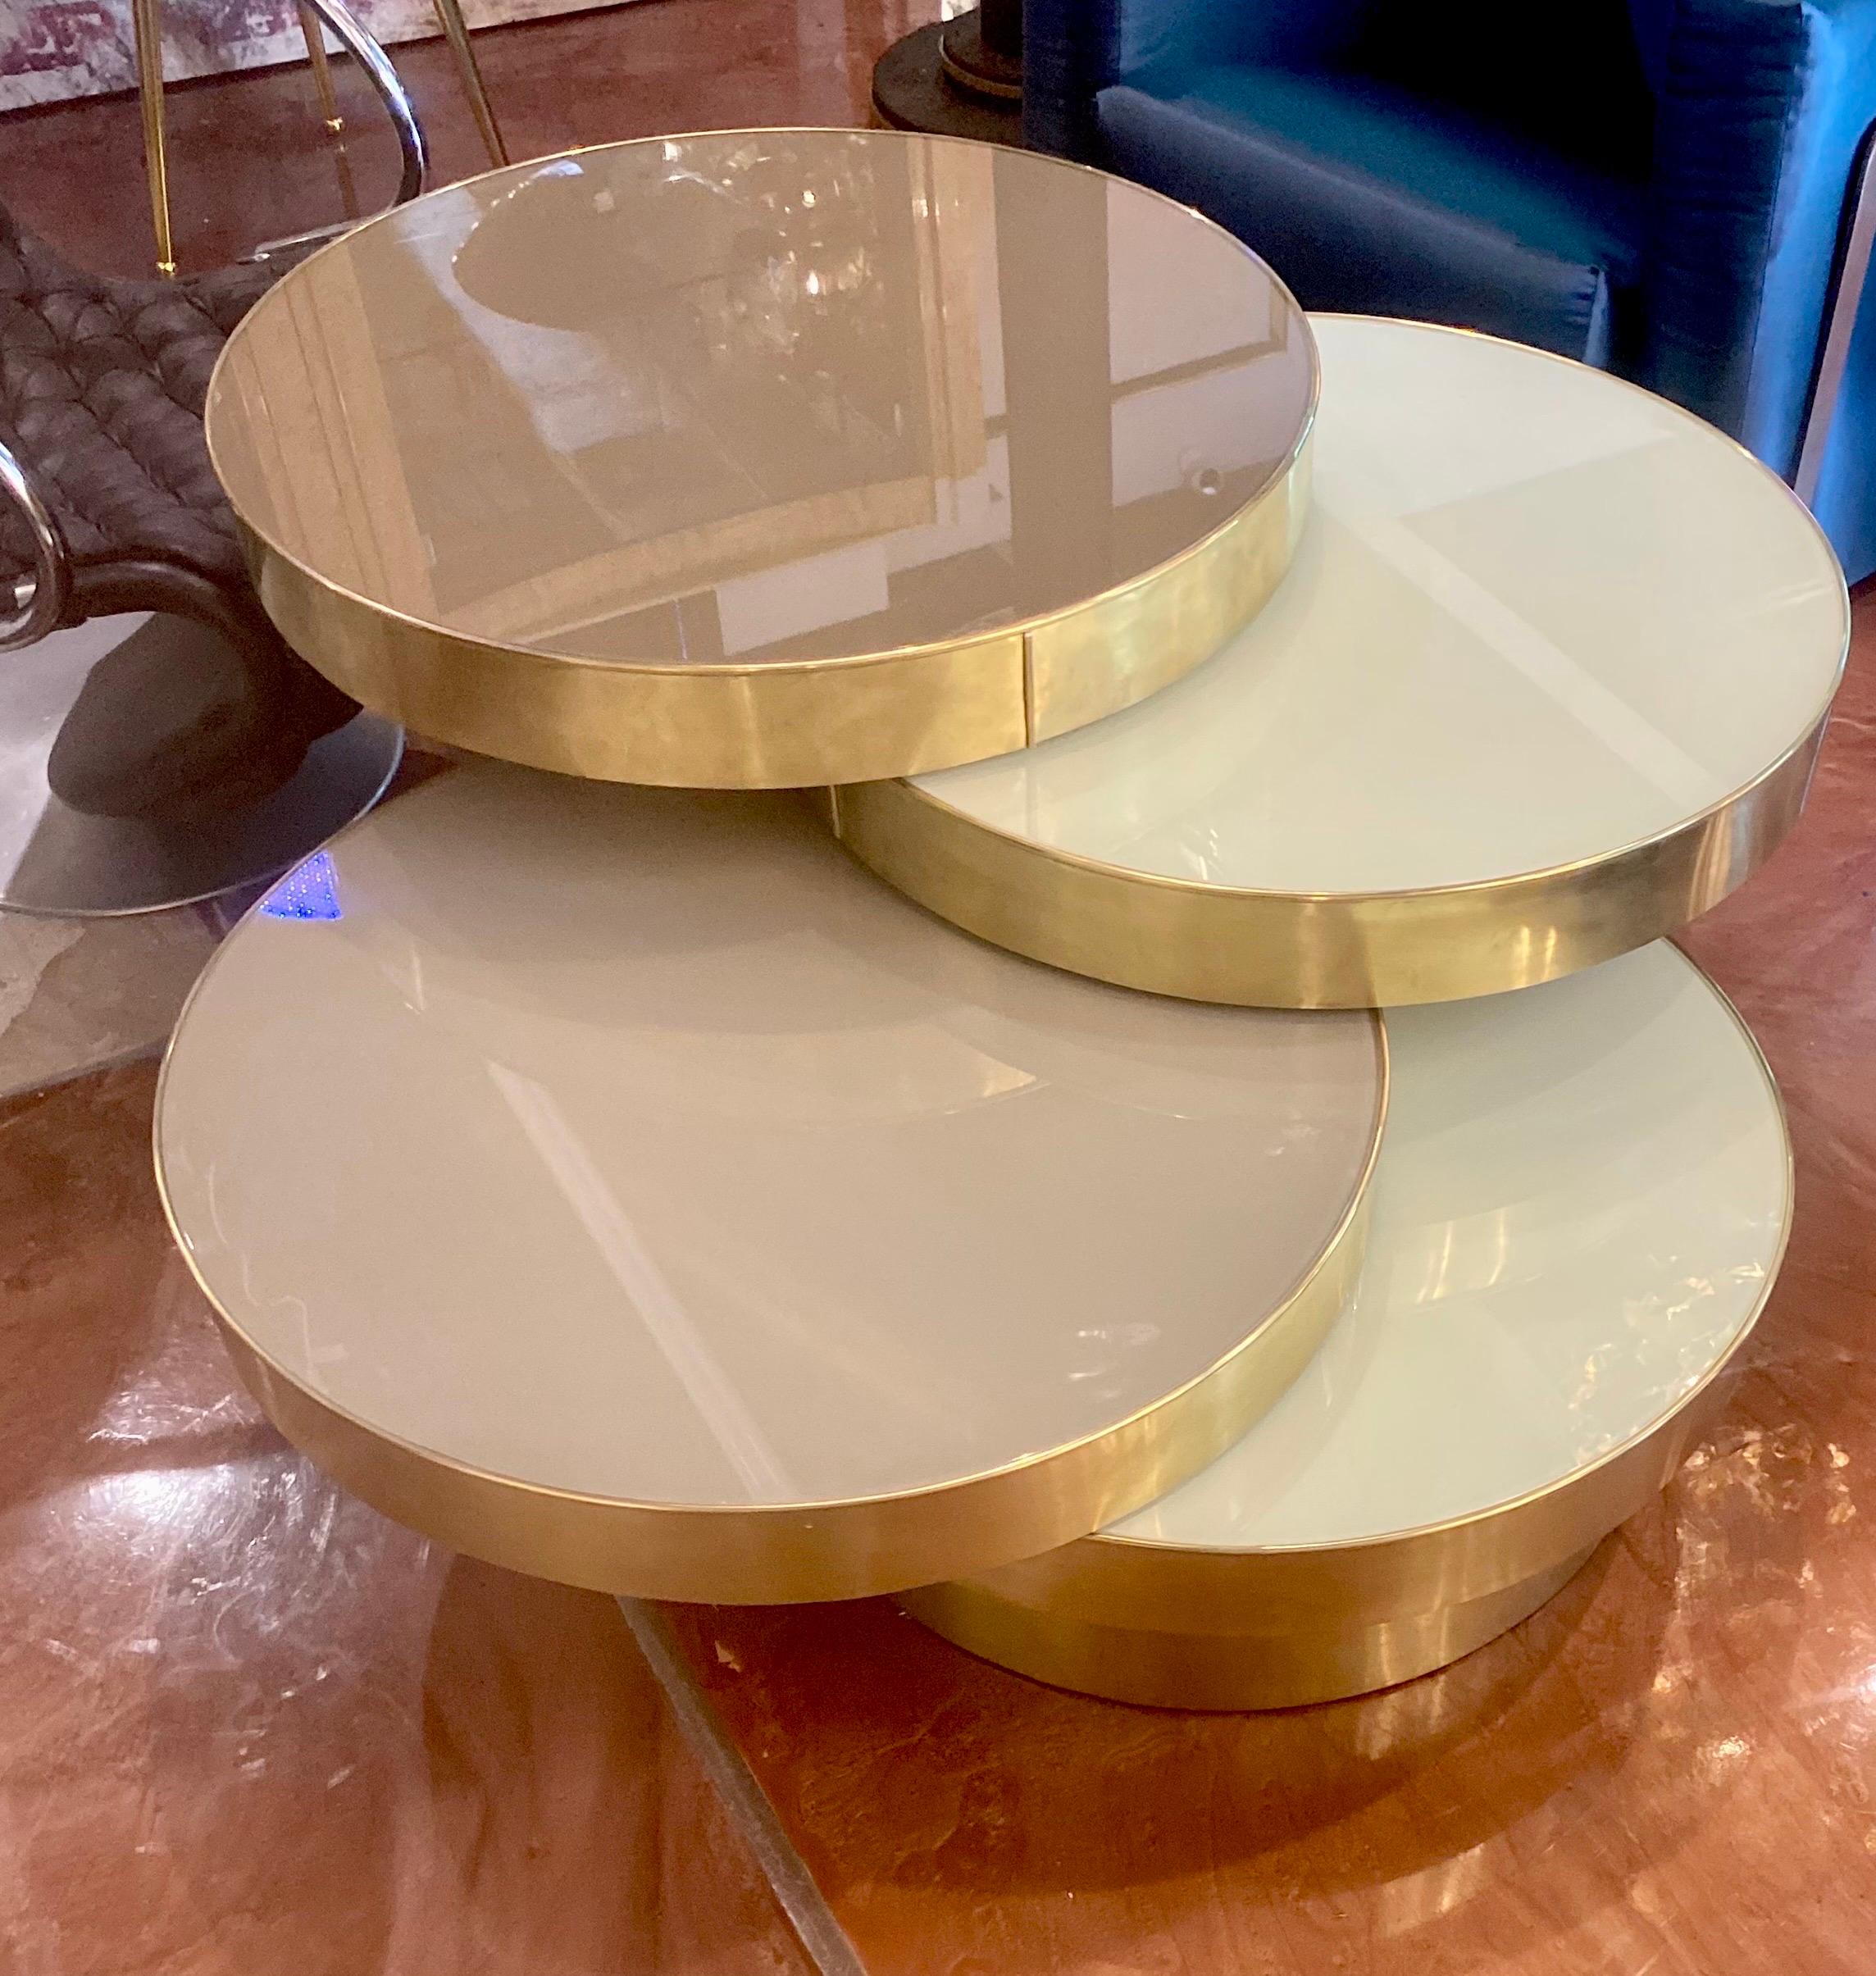 Beautiful 4 Tiered Multi-Level Reverse Painted Glass with Brass Base and Trim Italian Mid-Century Coffee Table. The Closed Tiers Measure 30.5 inches  in Diameter and 20.5 inches in Height. When Fully Open  the Width is 55 inches. 